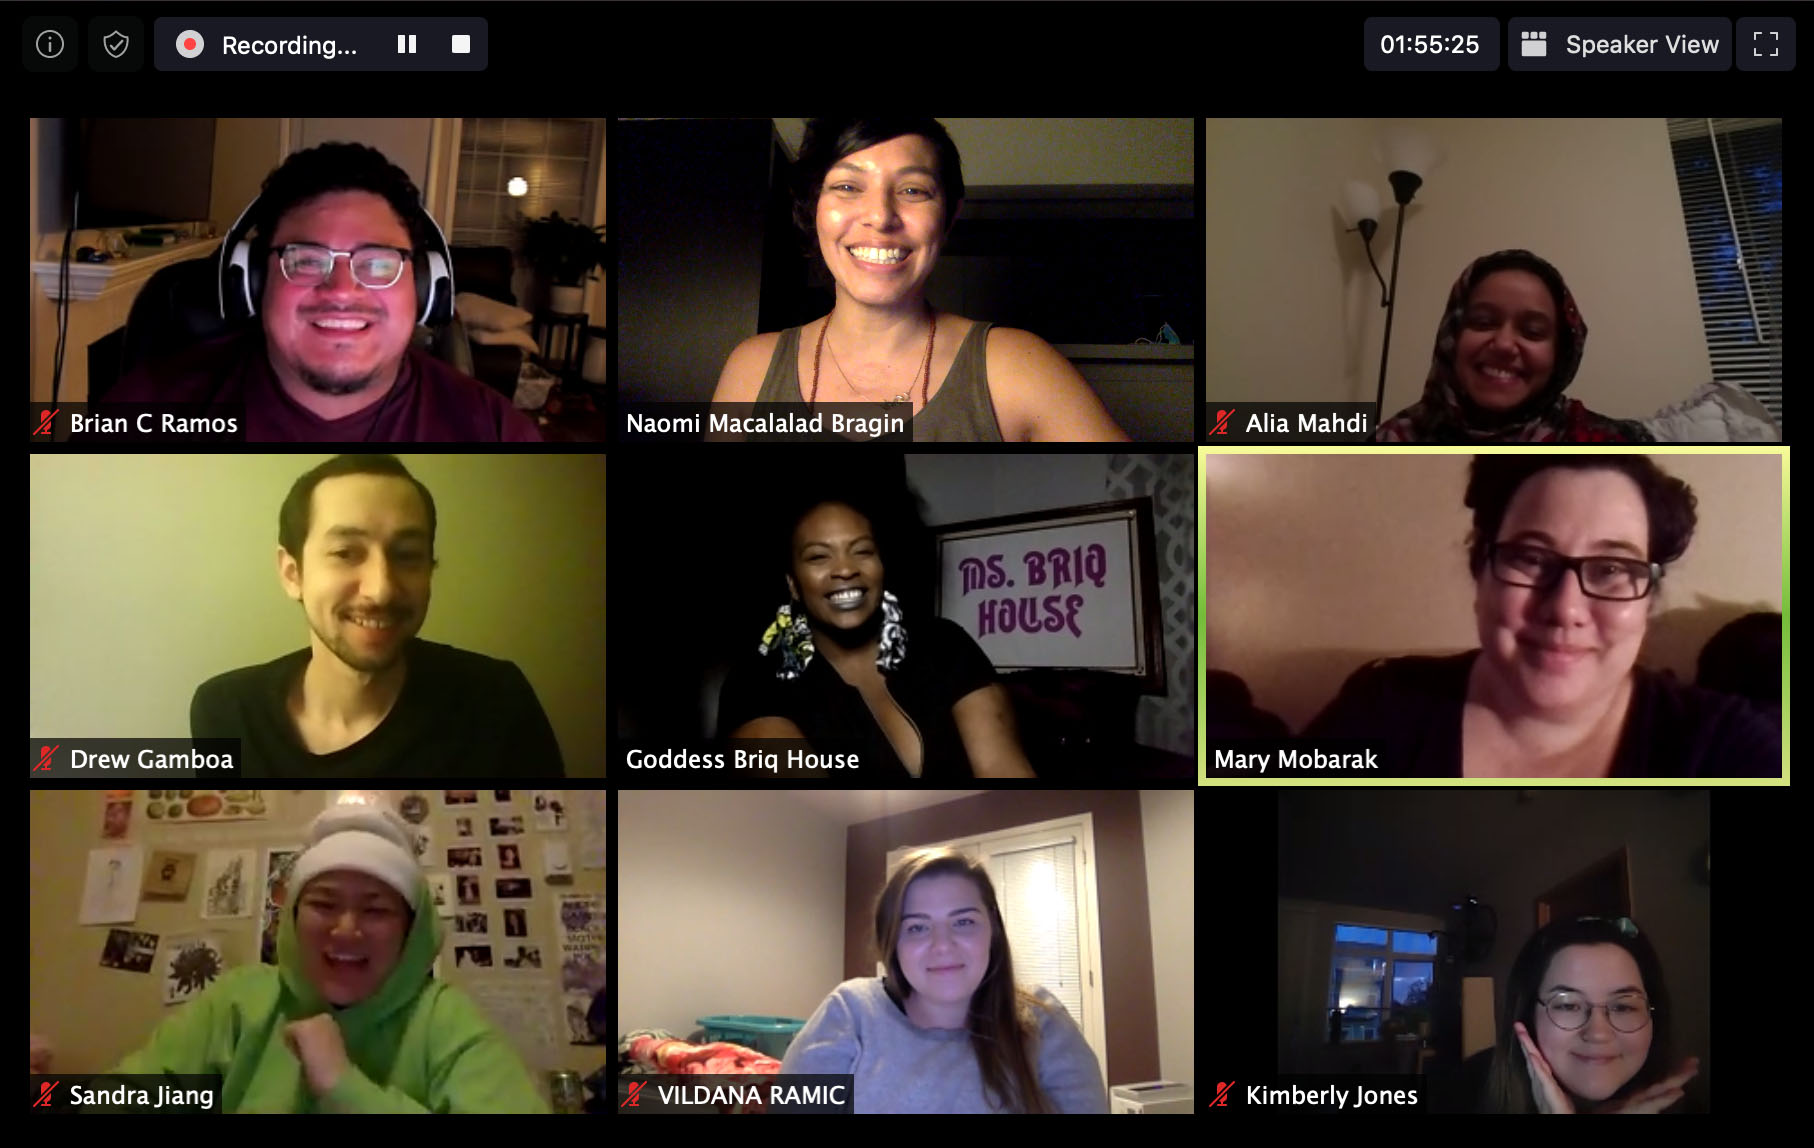 Zoom Screenshot - Performing Community with Ms. Briq House 2020-05-14-1